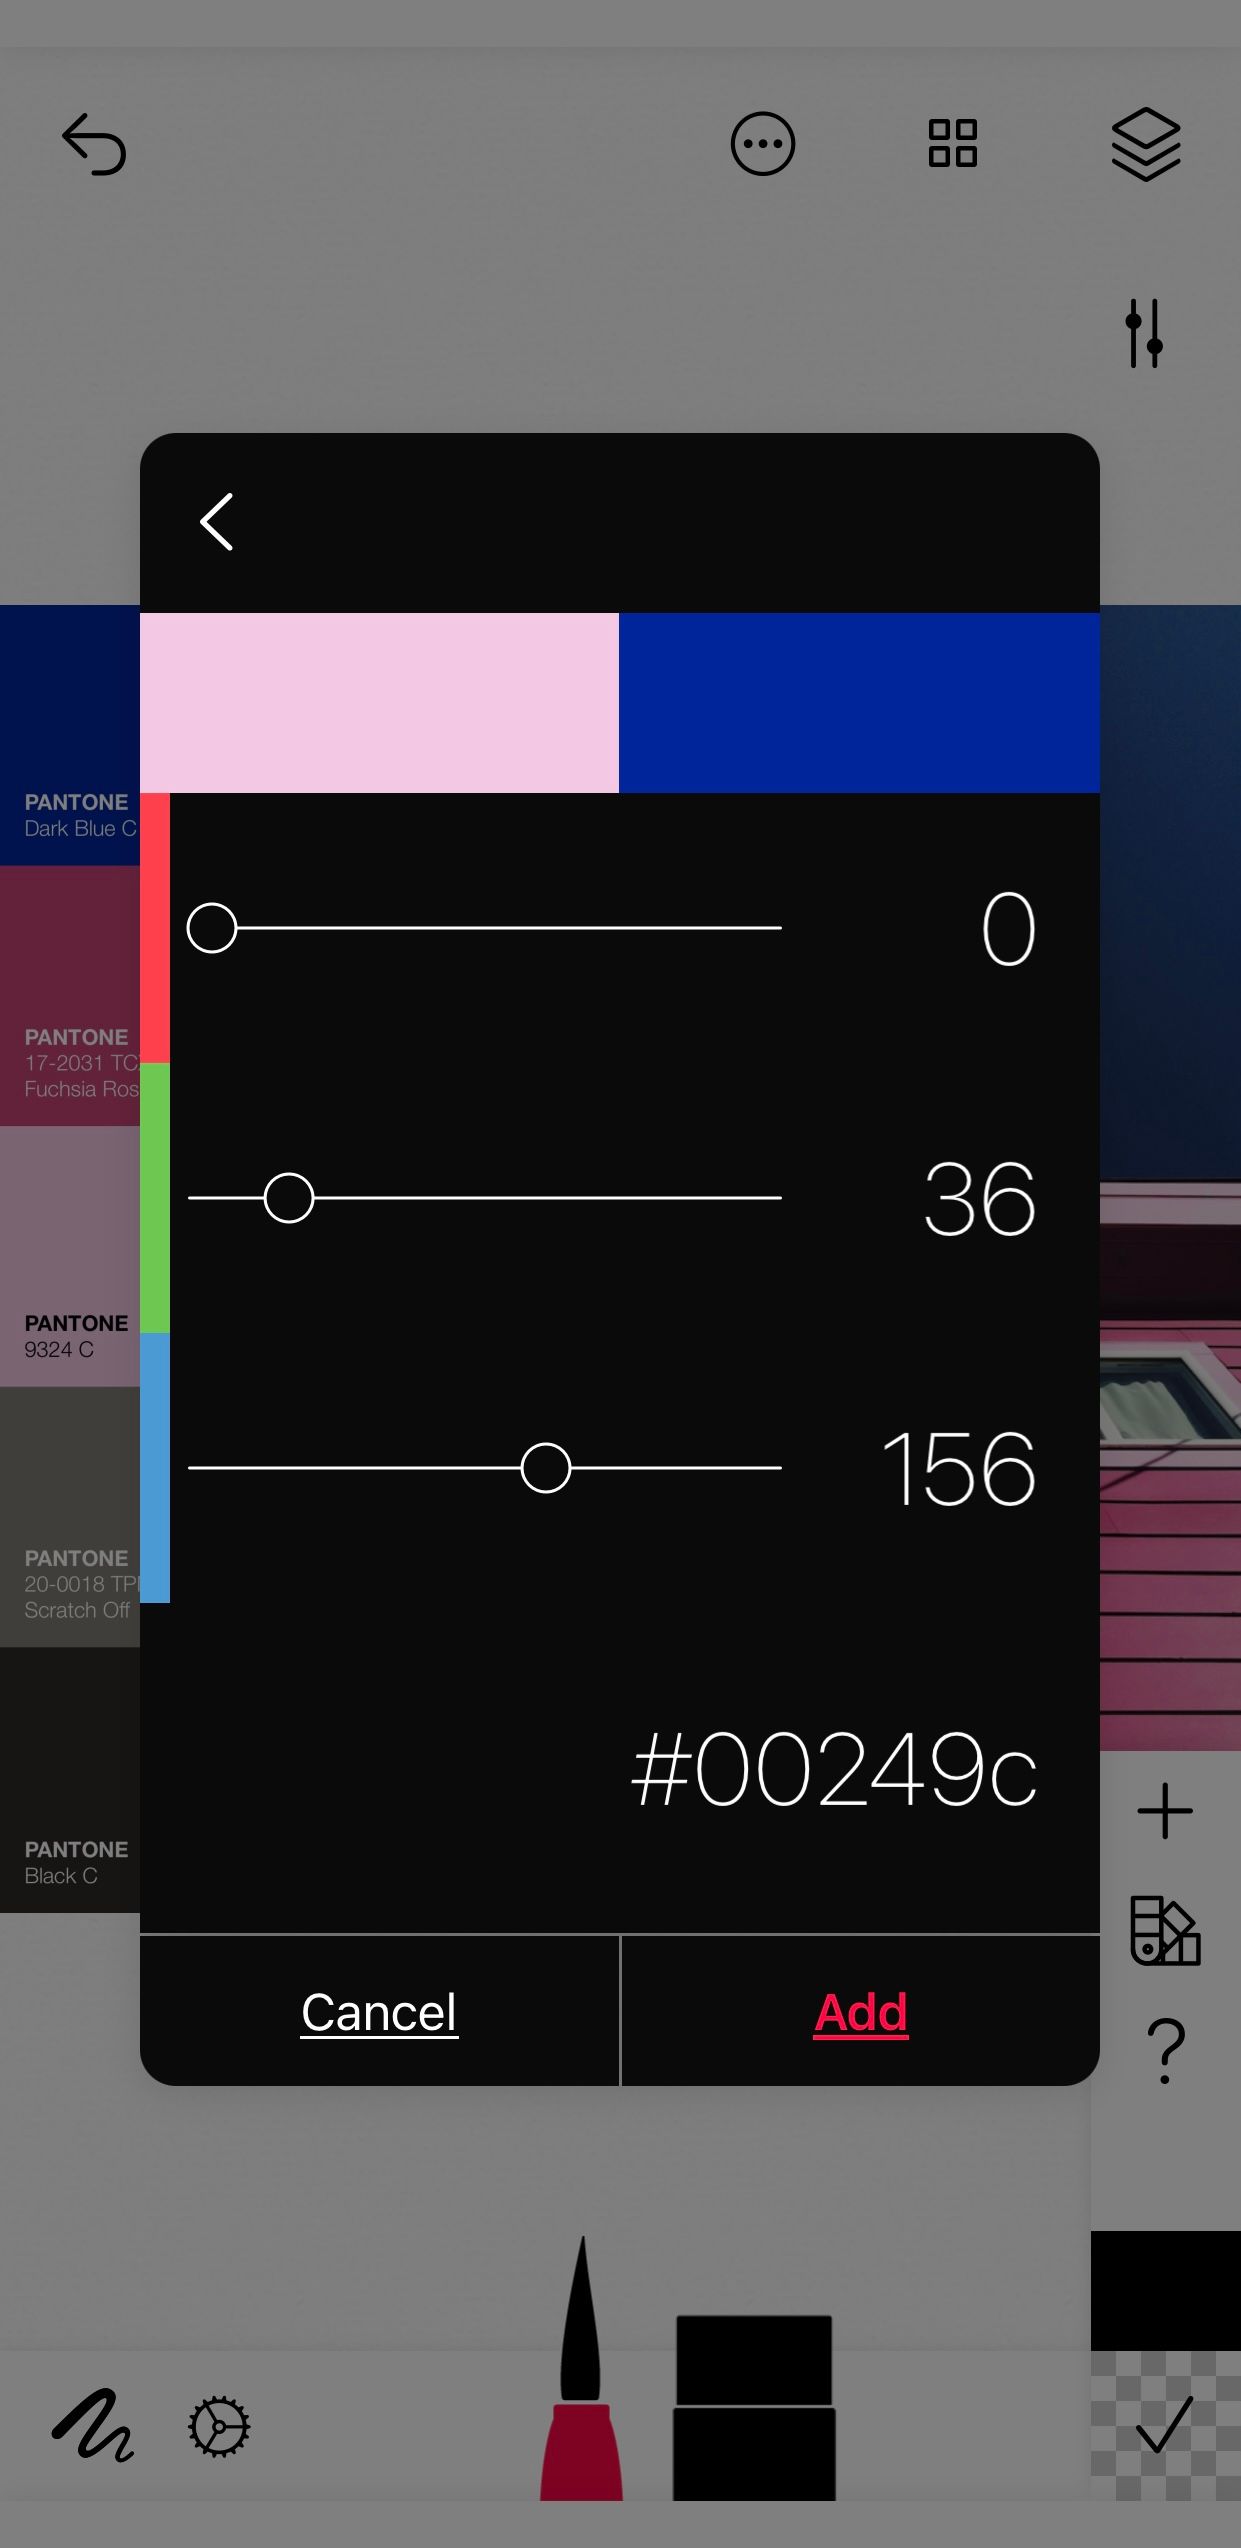 RGB values and HEX number of Pantone color Dark Blue C